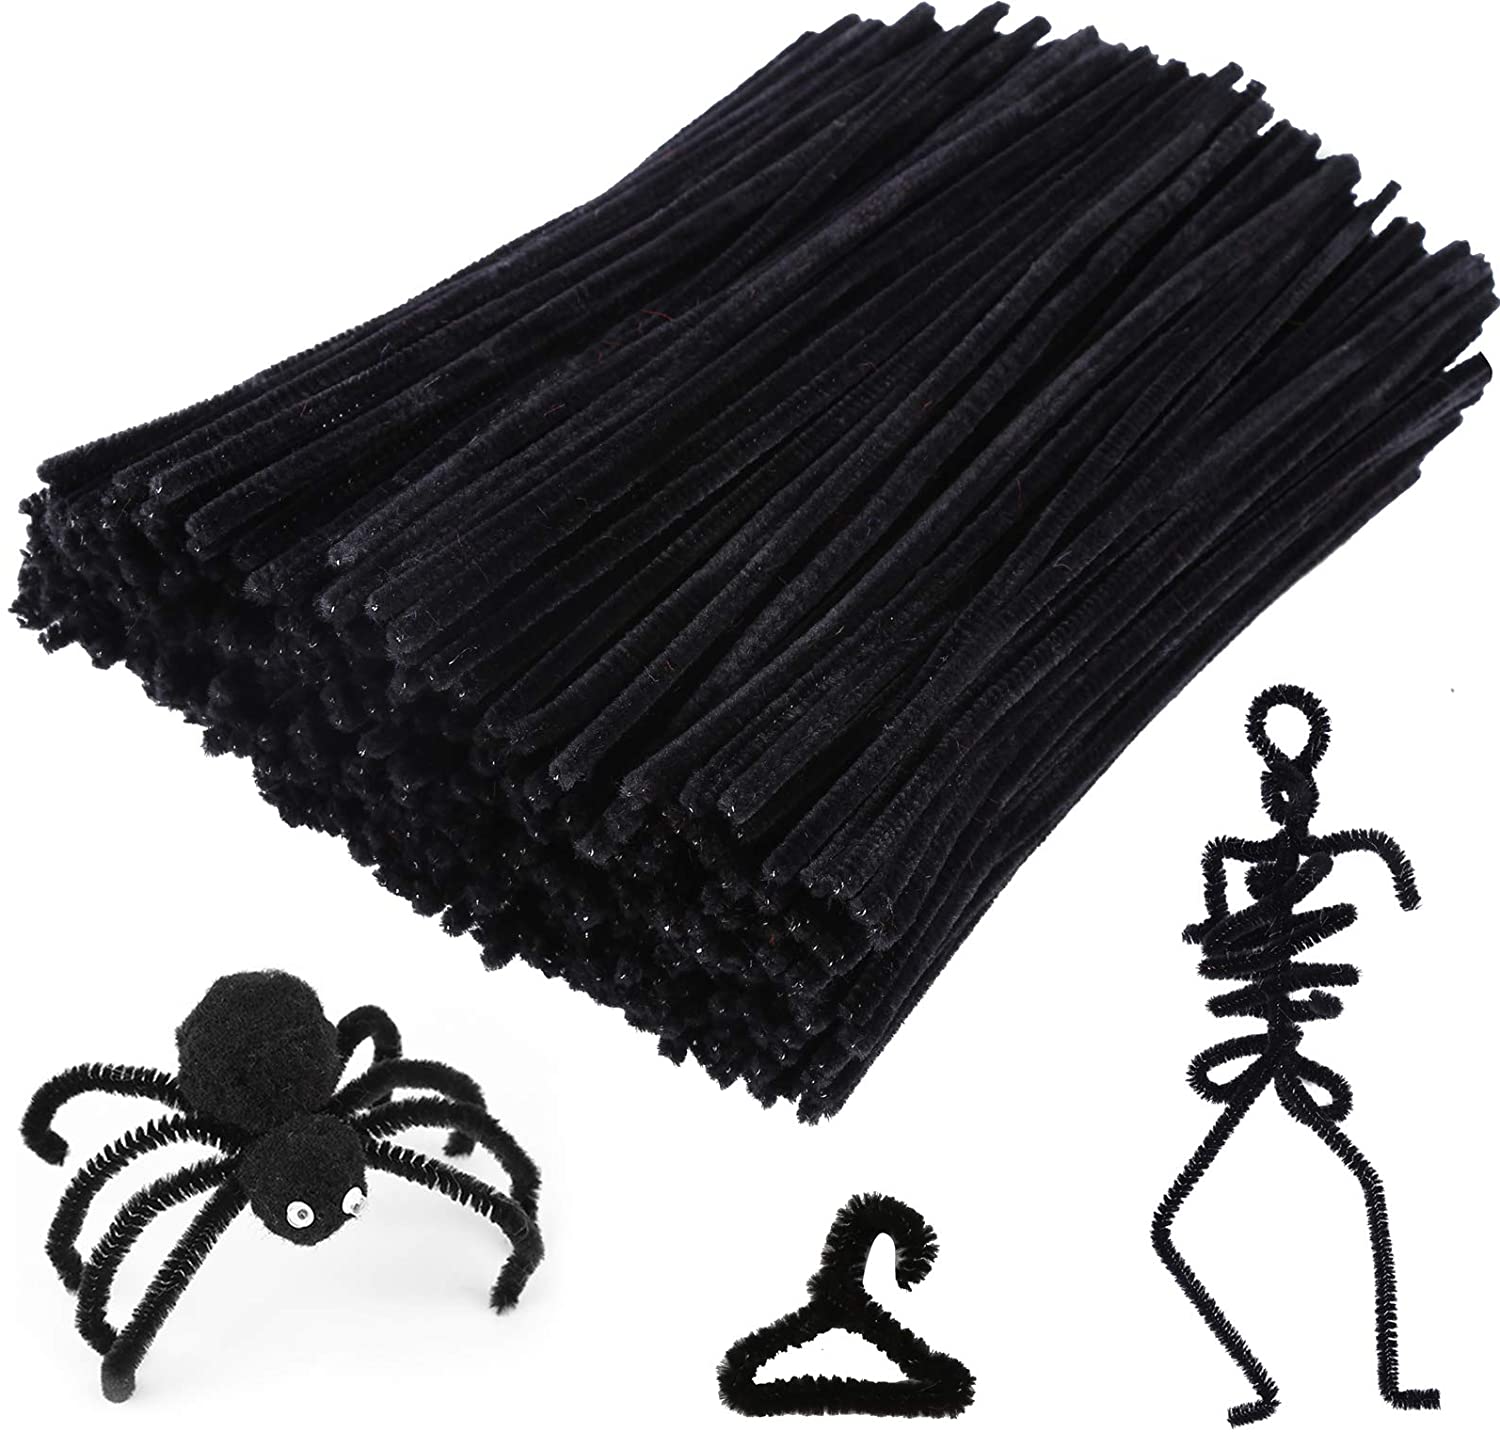 200 Pieces Black Pipe Cleaners Craft Chenille Stems for DIY Art Creative  Crafts and Decorations (12 Inch x 6 mm)